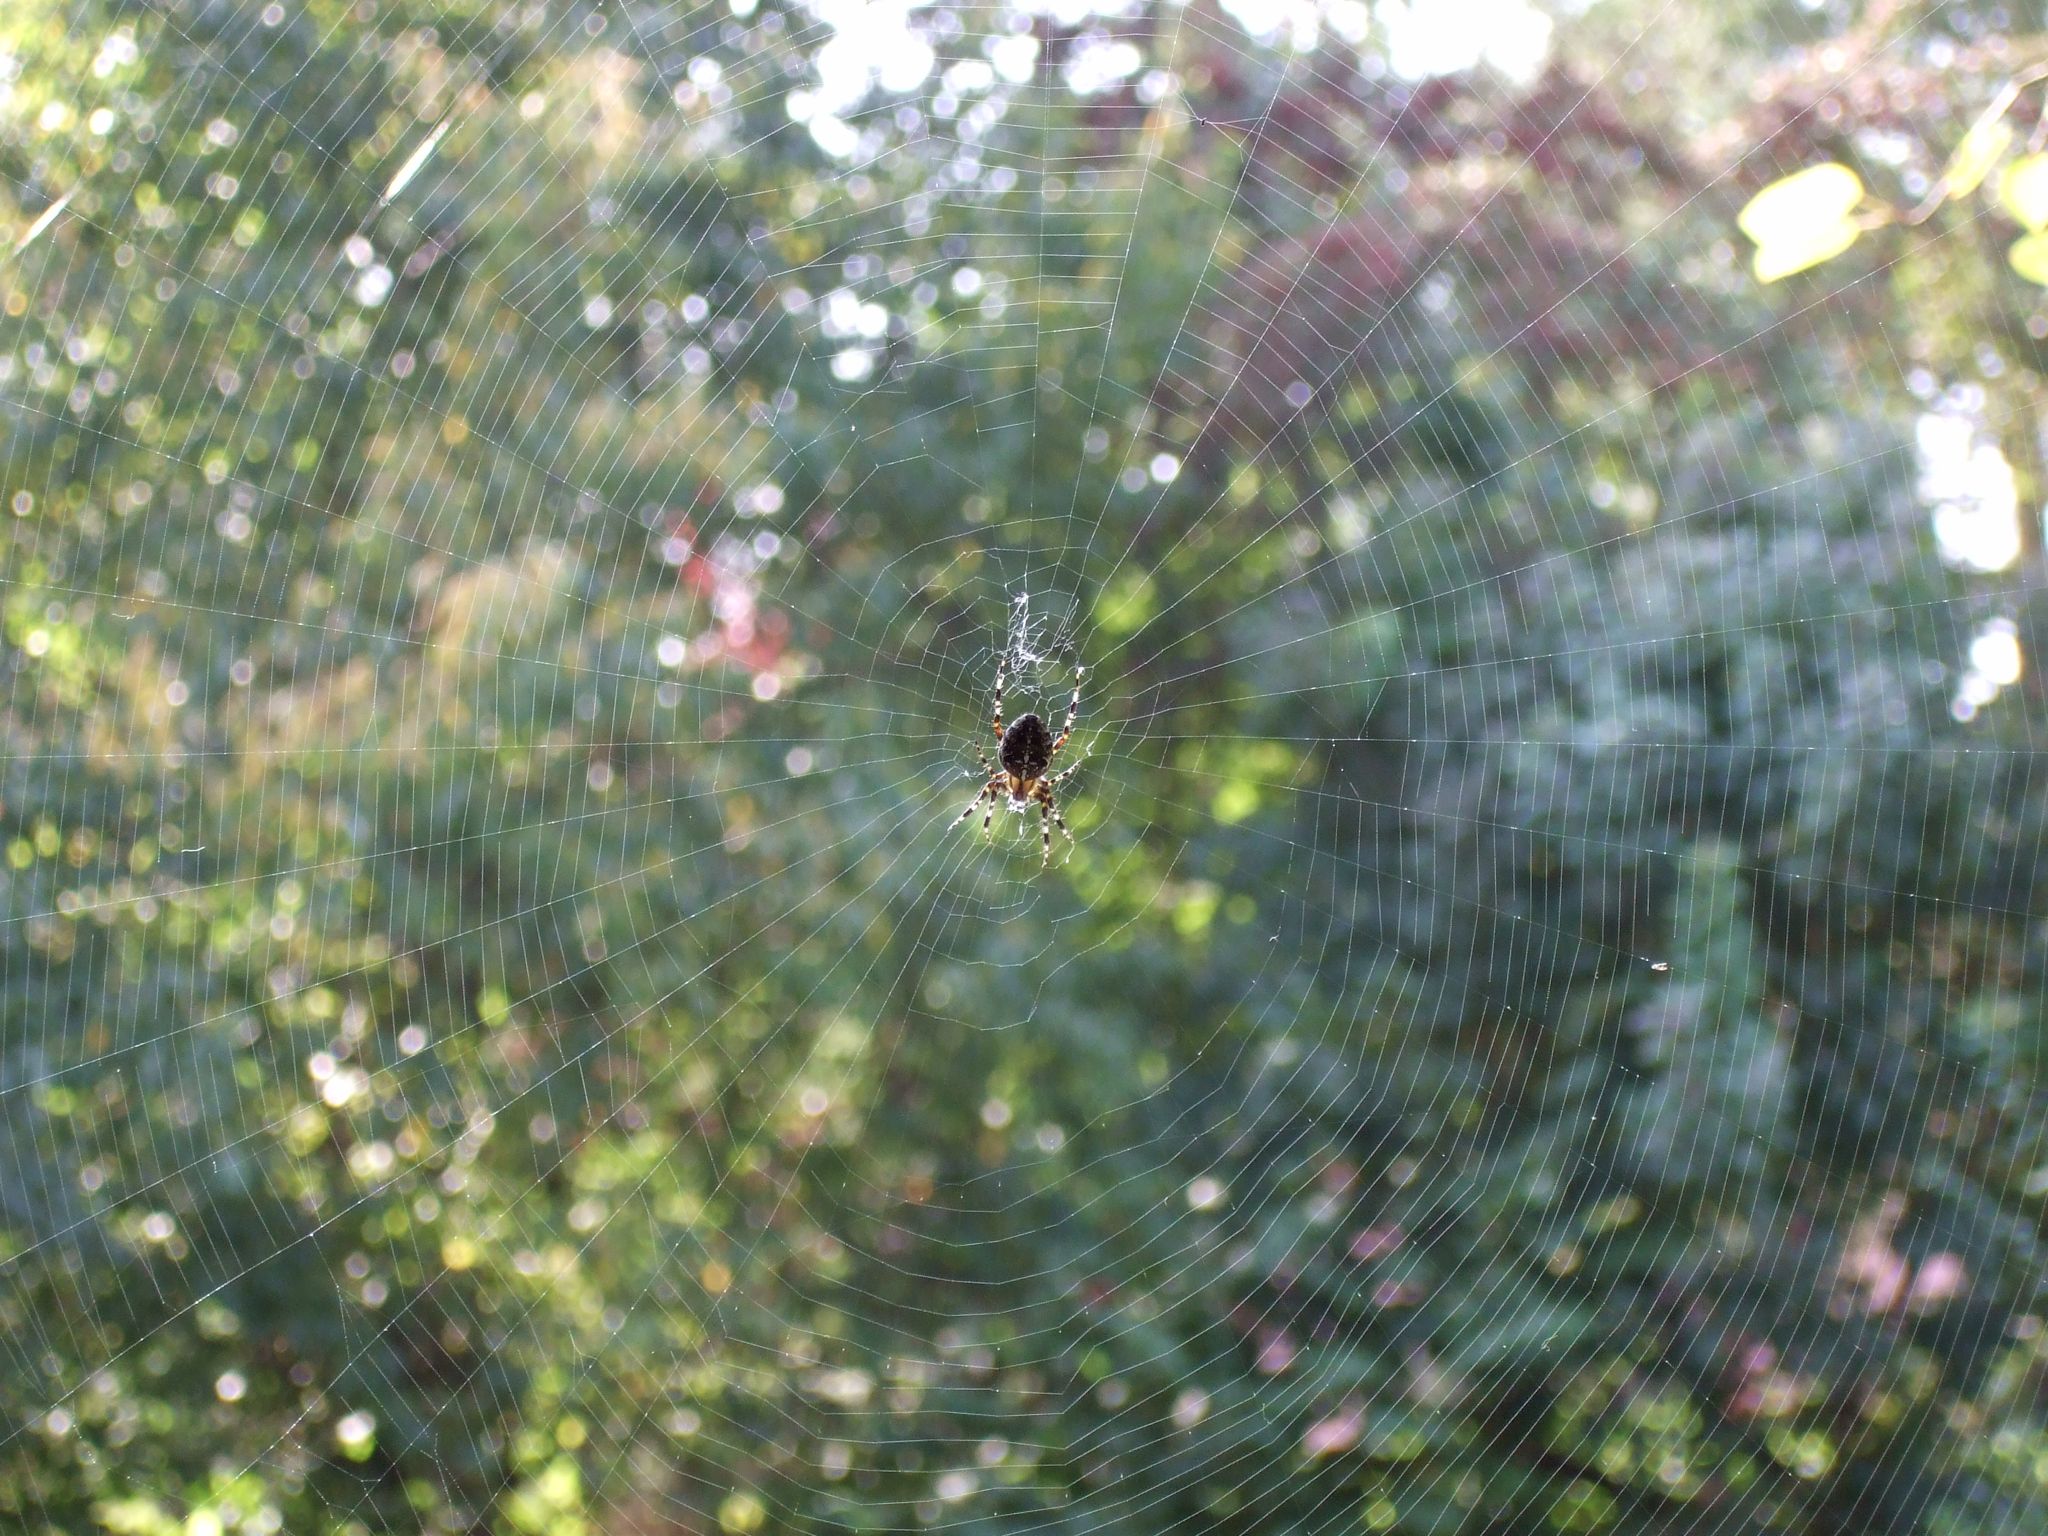 Photo 3 of 23 from the album Spiders.